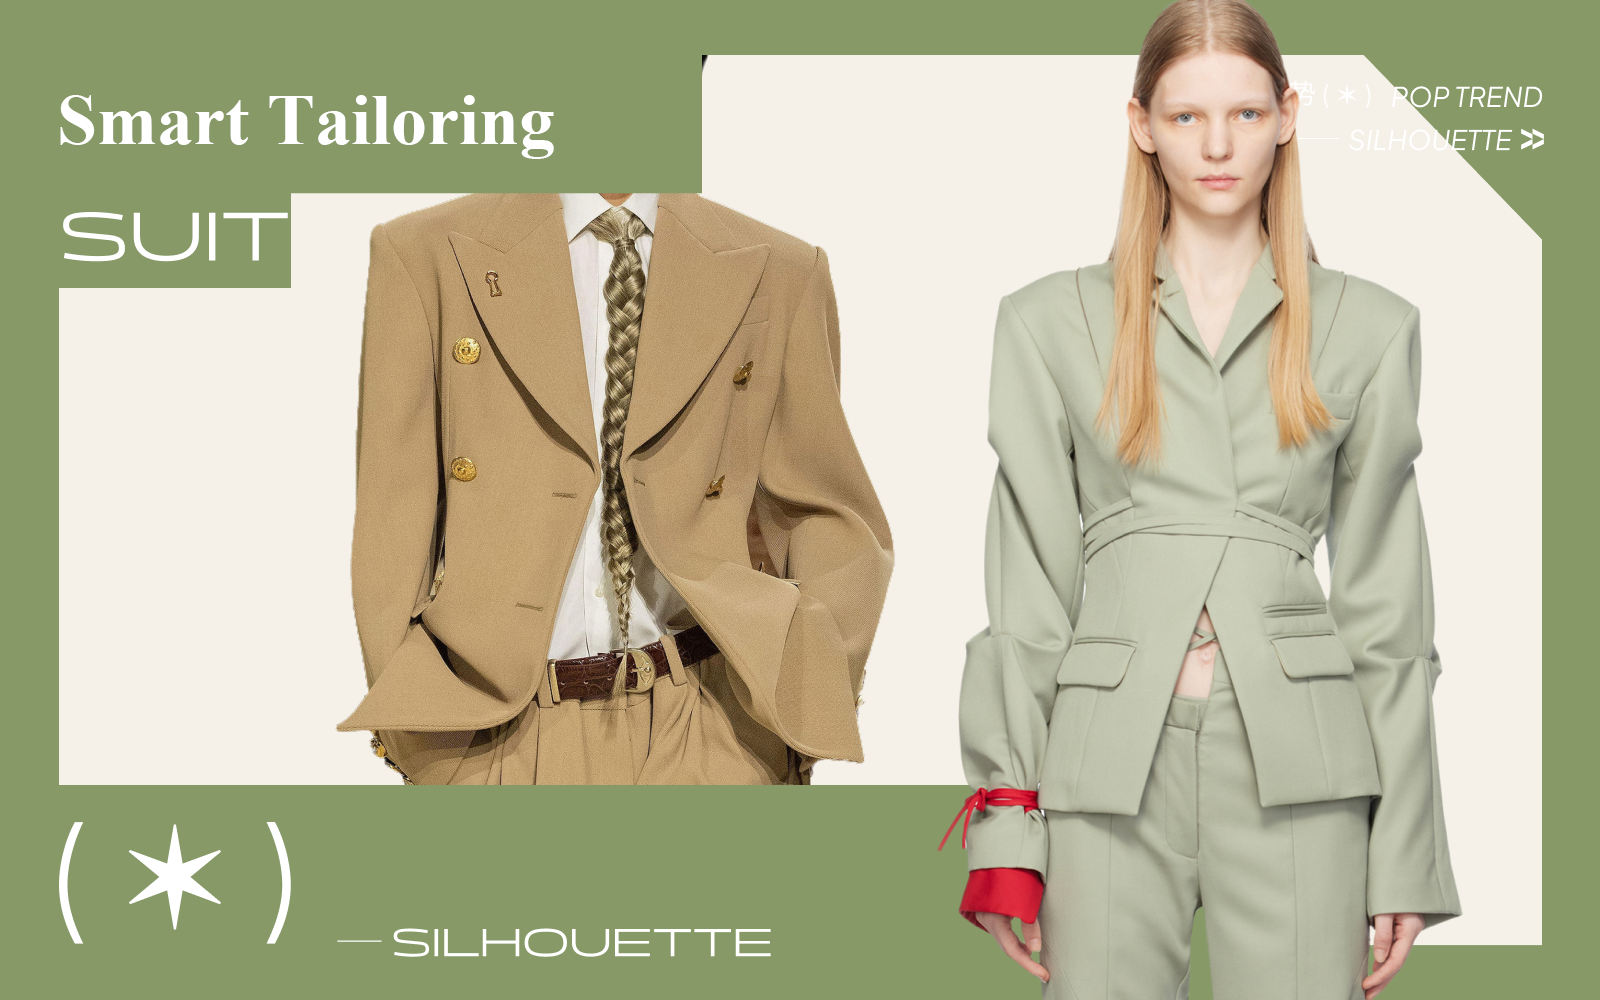 Smart Tailoring -- The Silhouette Trend for Women's Suit